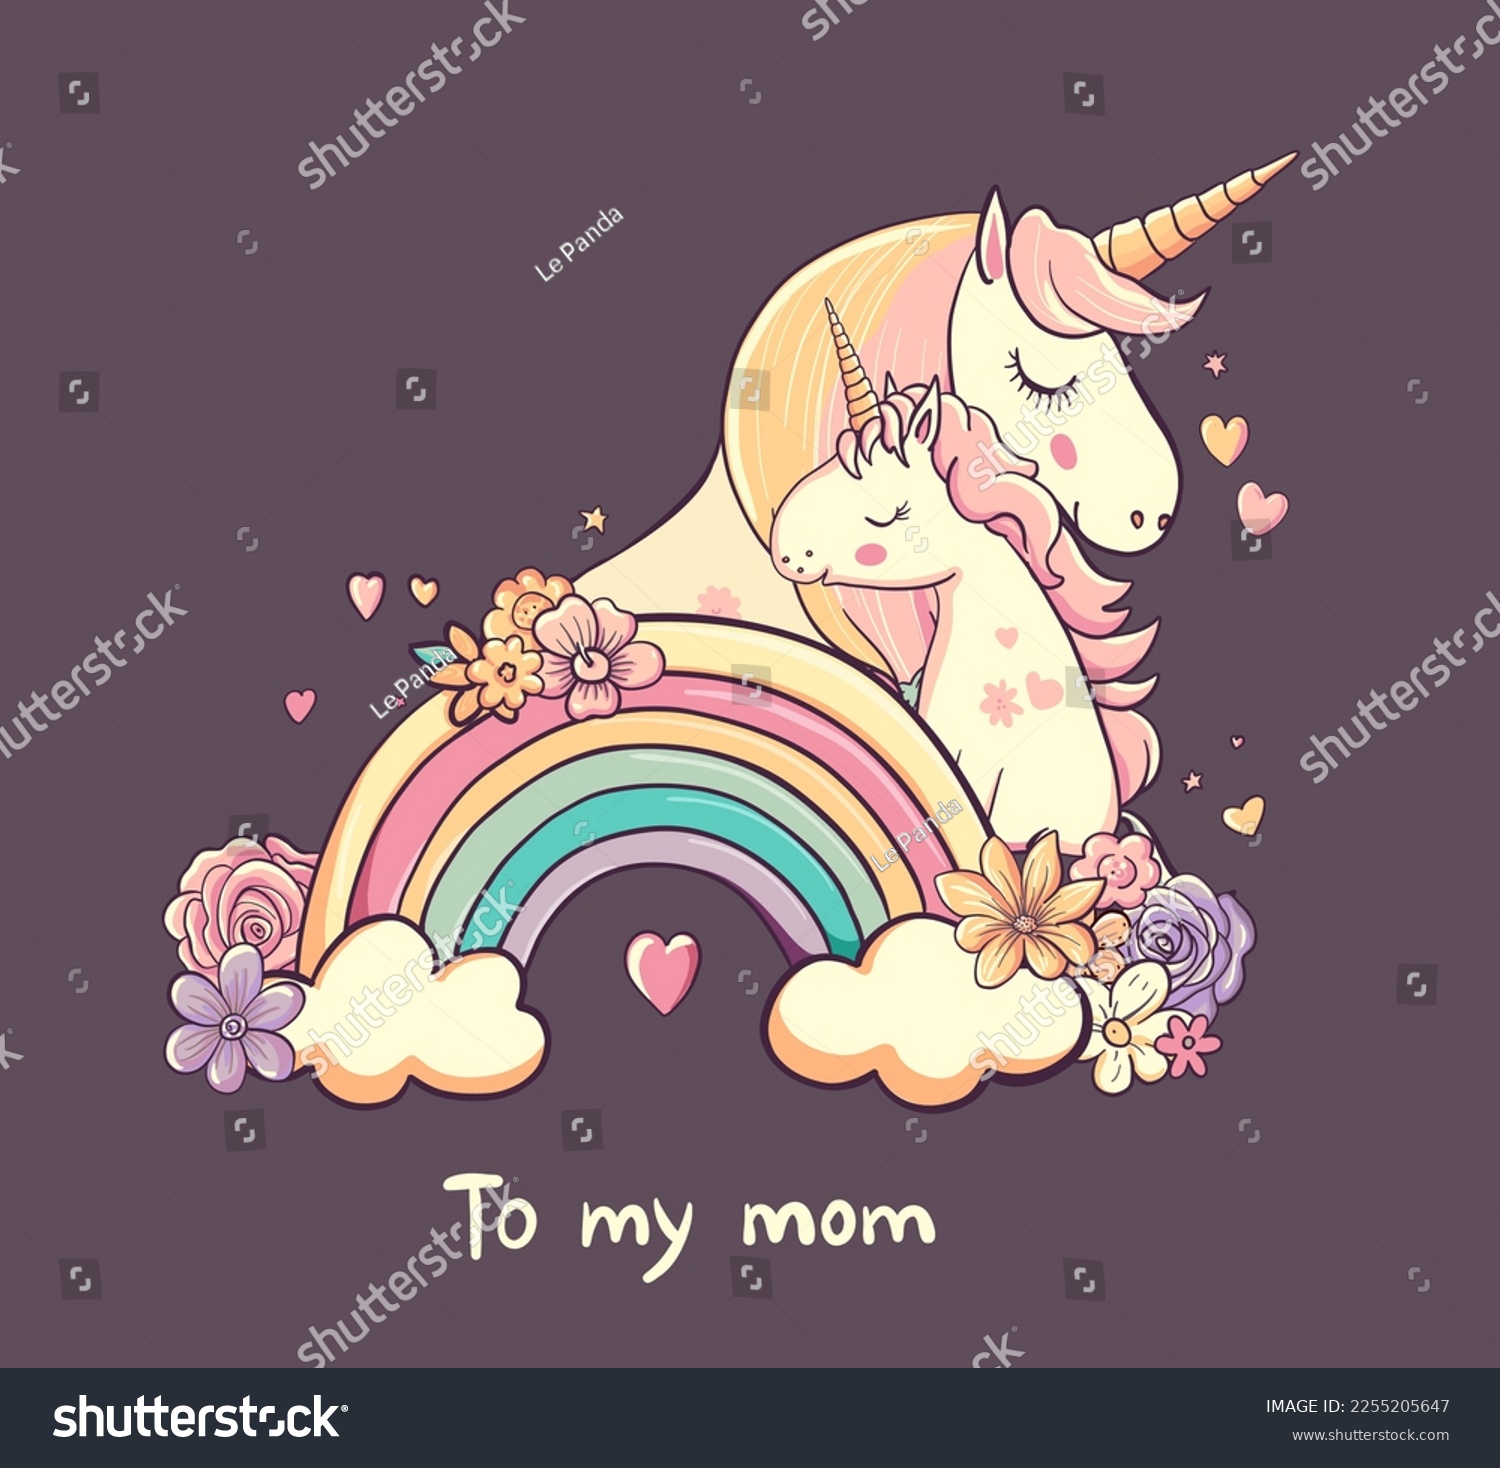 SVG of Unicorn with baby, flowers, hearts. Mothers day card, text To my mom. Beautiful cartoon character mother and baby together. Pretty animals with horns. Vector illustration for holiday unicorns design  svg